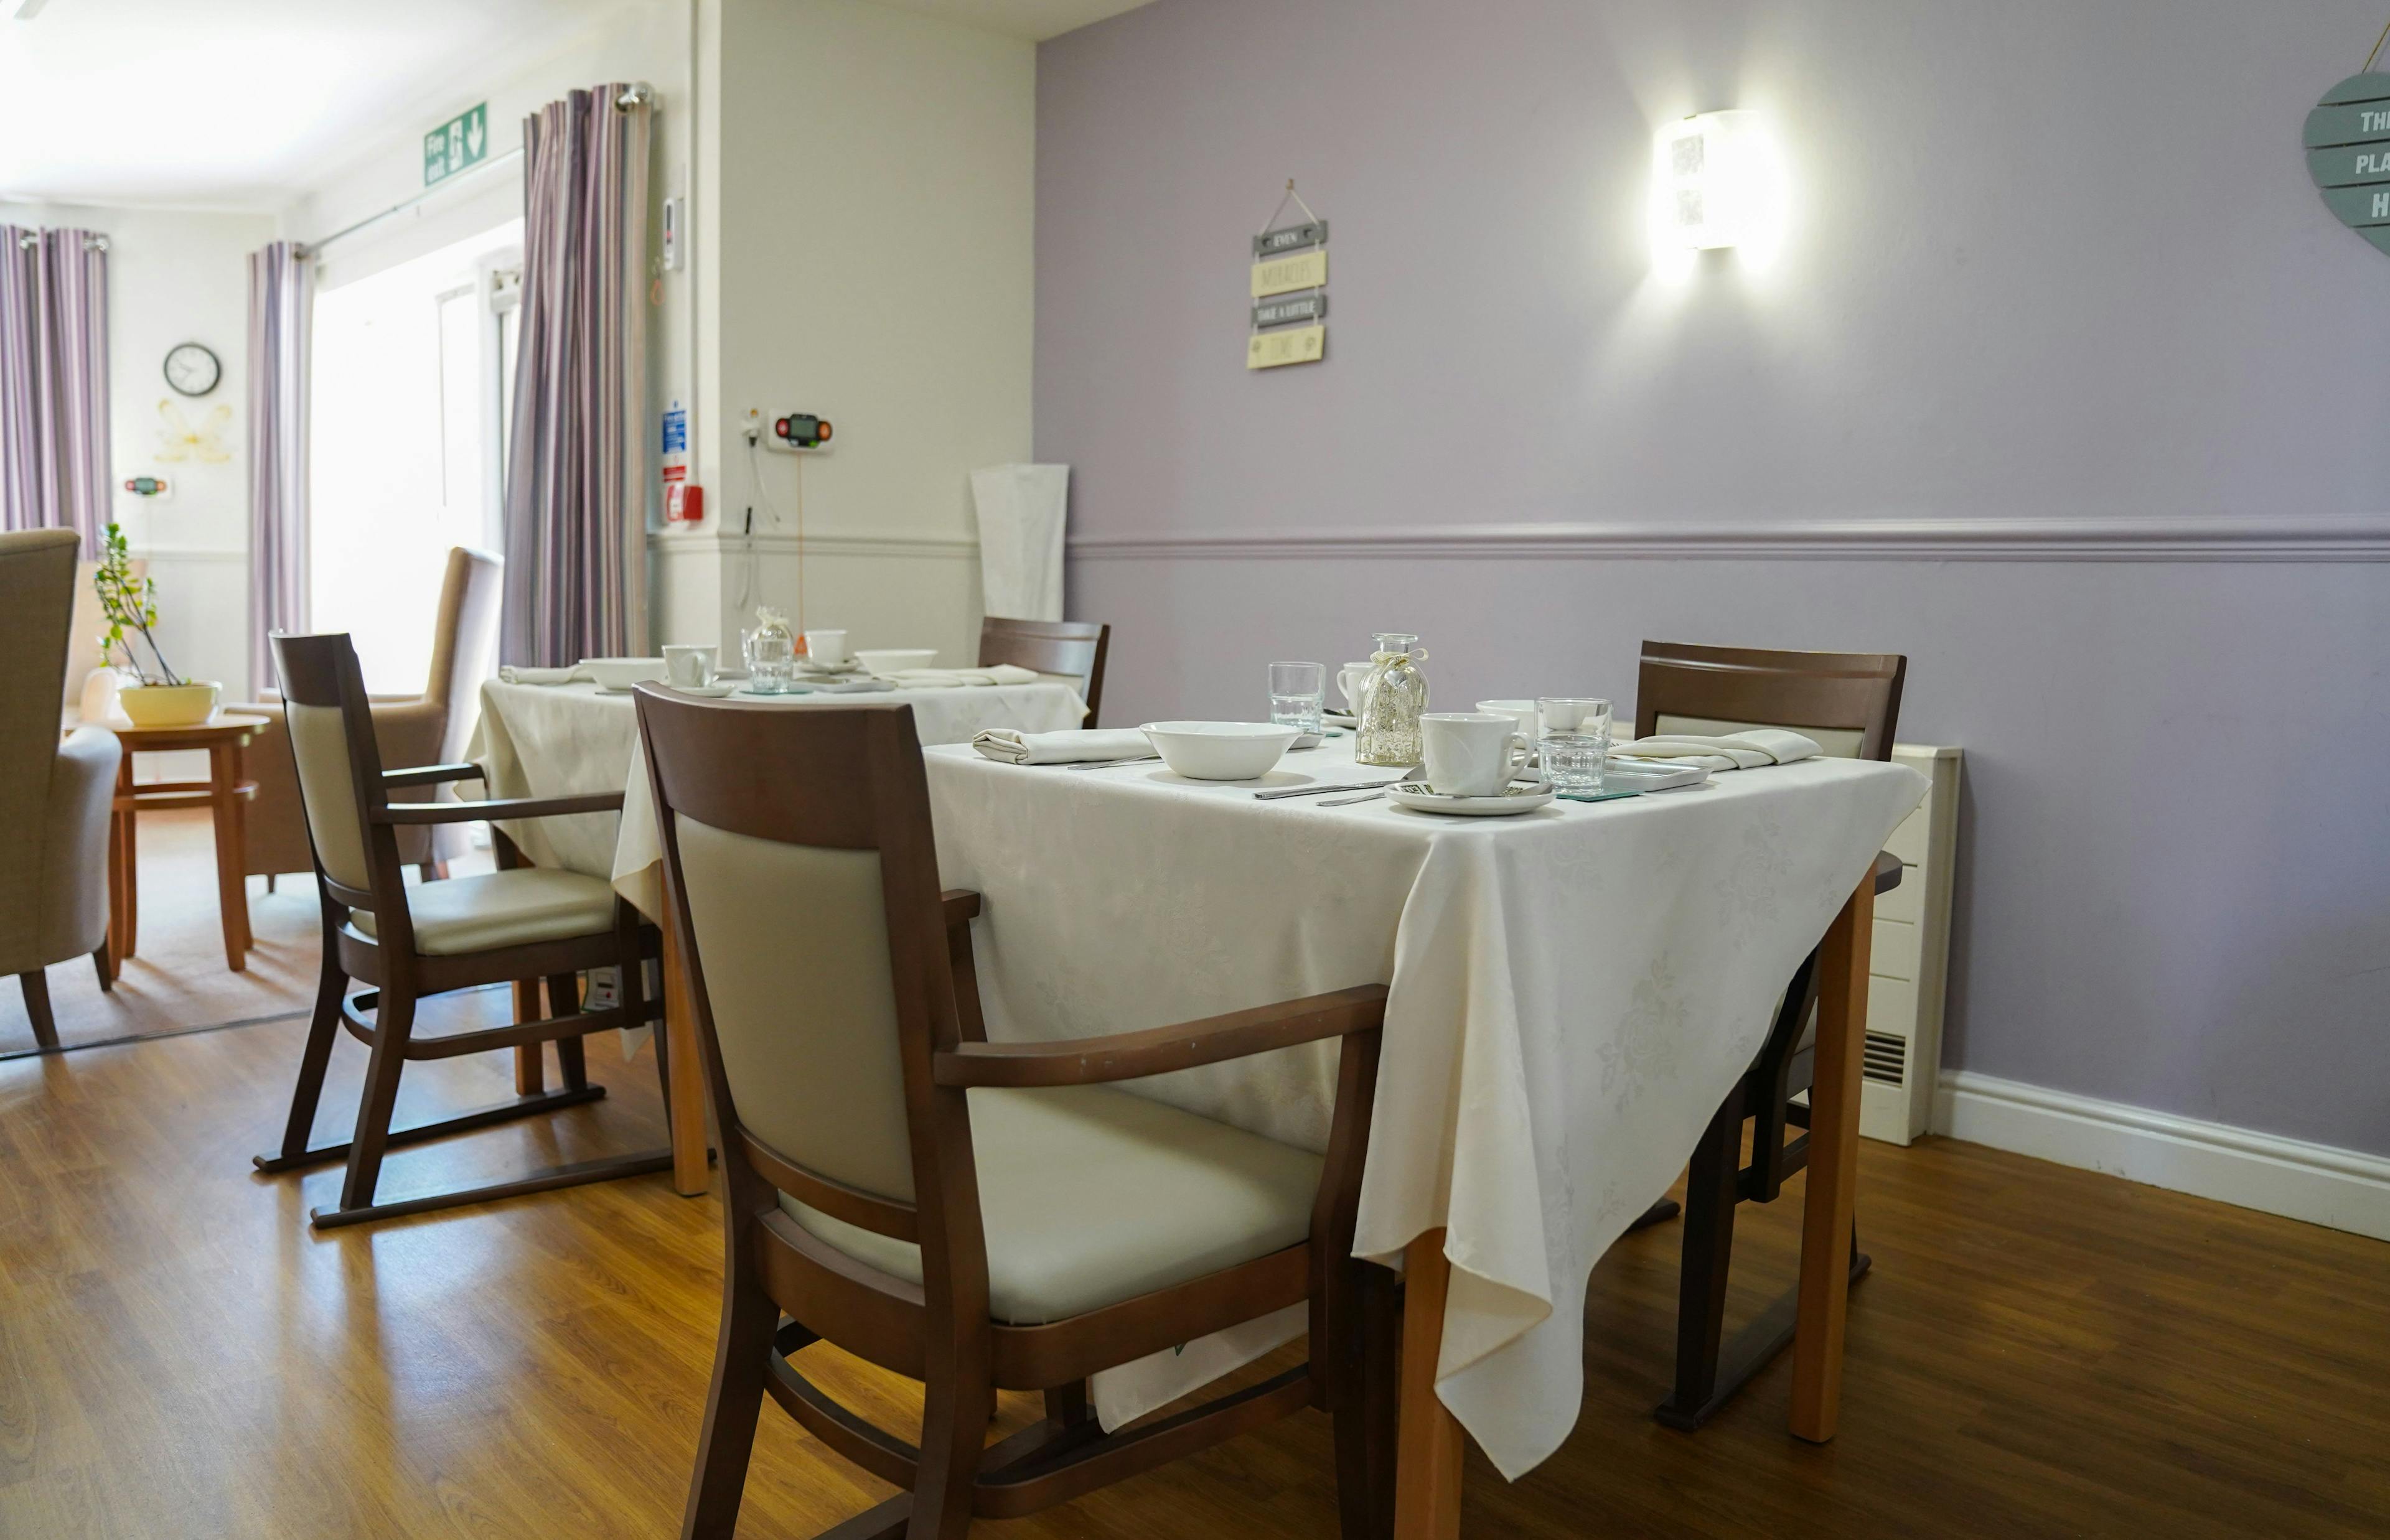 Dining Room at Allanbank Care Home in Dumfries and Galloway, Stewartry of Kirkcudbright